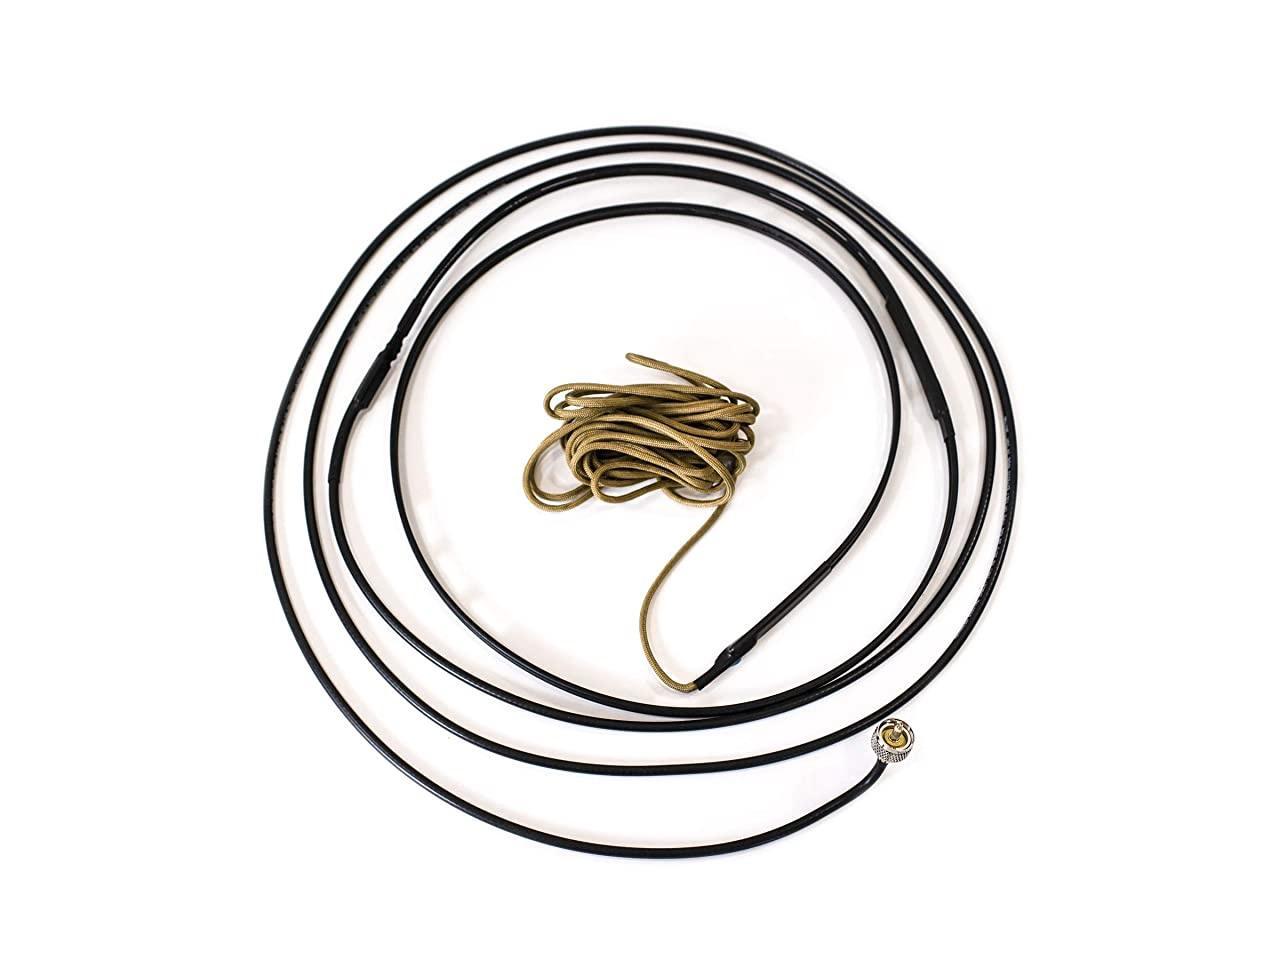 The Survival Antenna Turns Your Portable Hand Held or Vehicle Ham Radio Into a Survival Tool Choose The Right Adapter SMA Male Fits Yaesu FT-2DR FT-60R FT-1DR-HD More Radios See Product Description. 